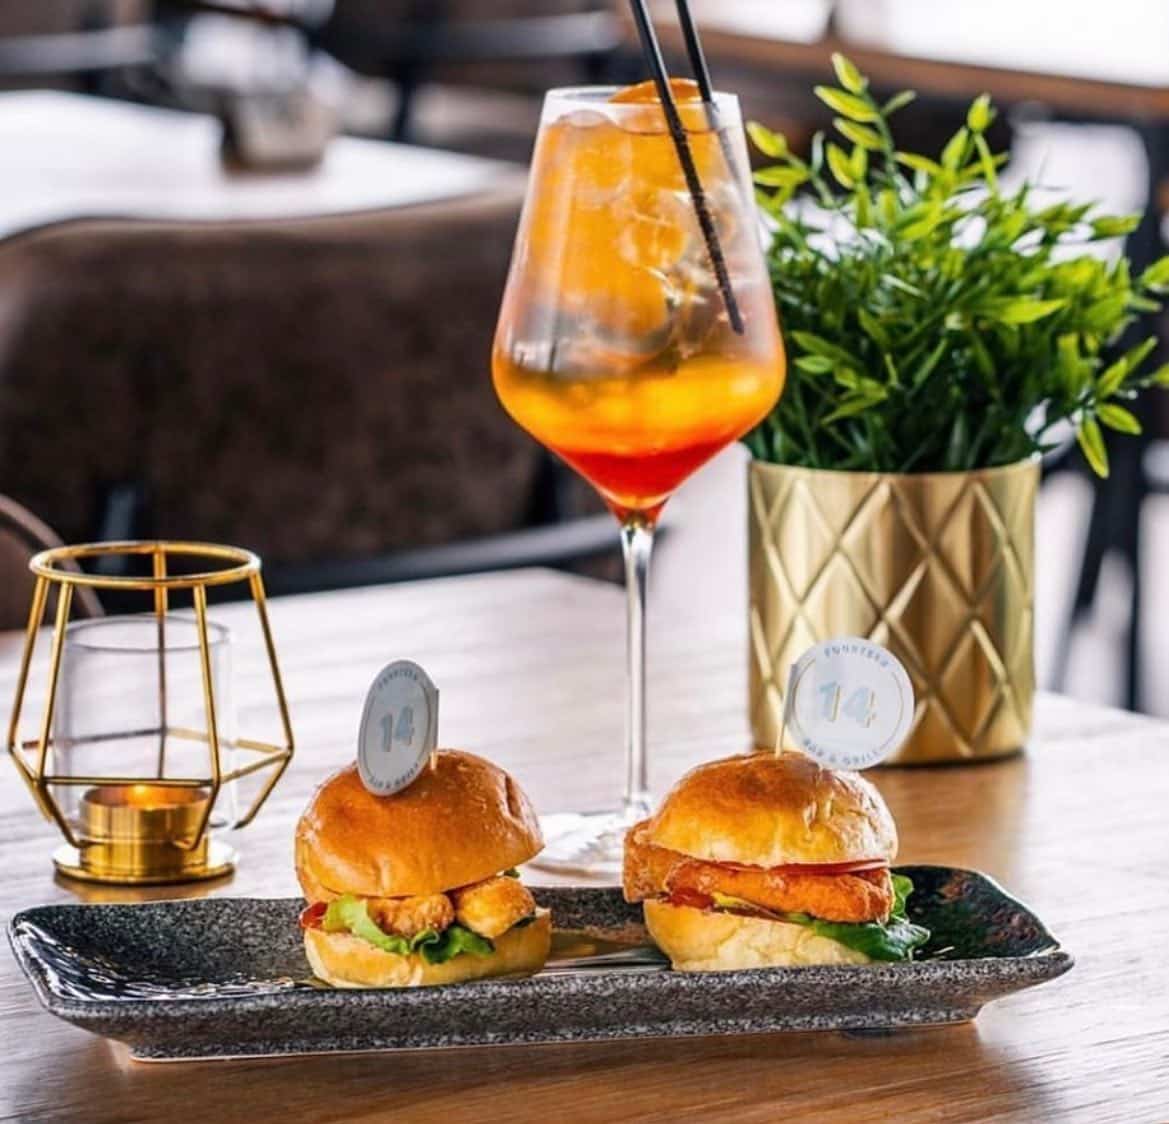 An orange cocktail beside a plate on which are two sliders are 14 Bar & Grill.